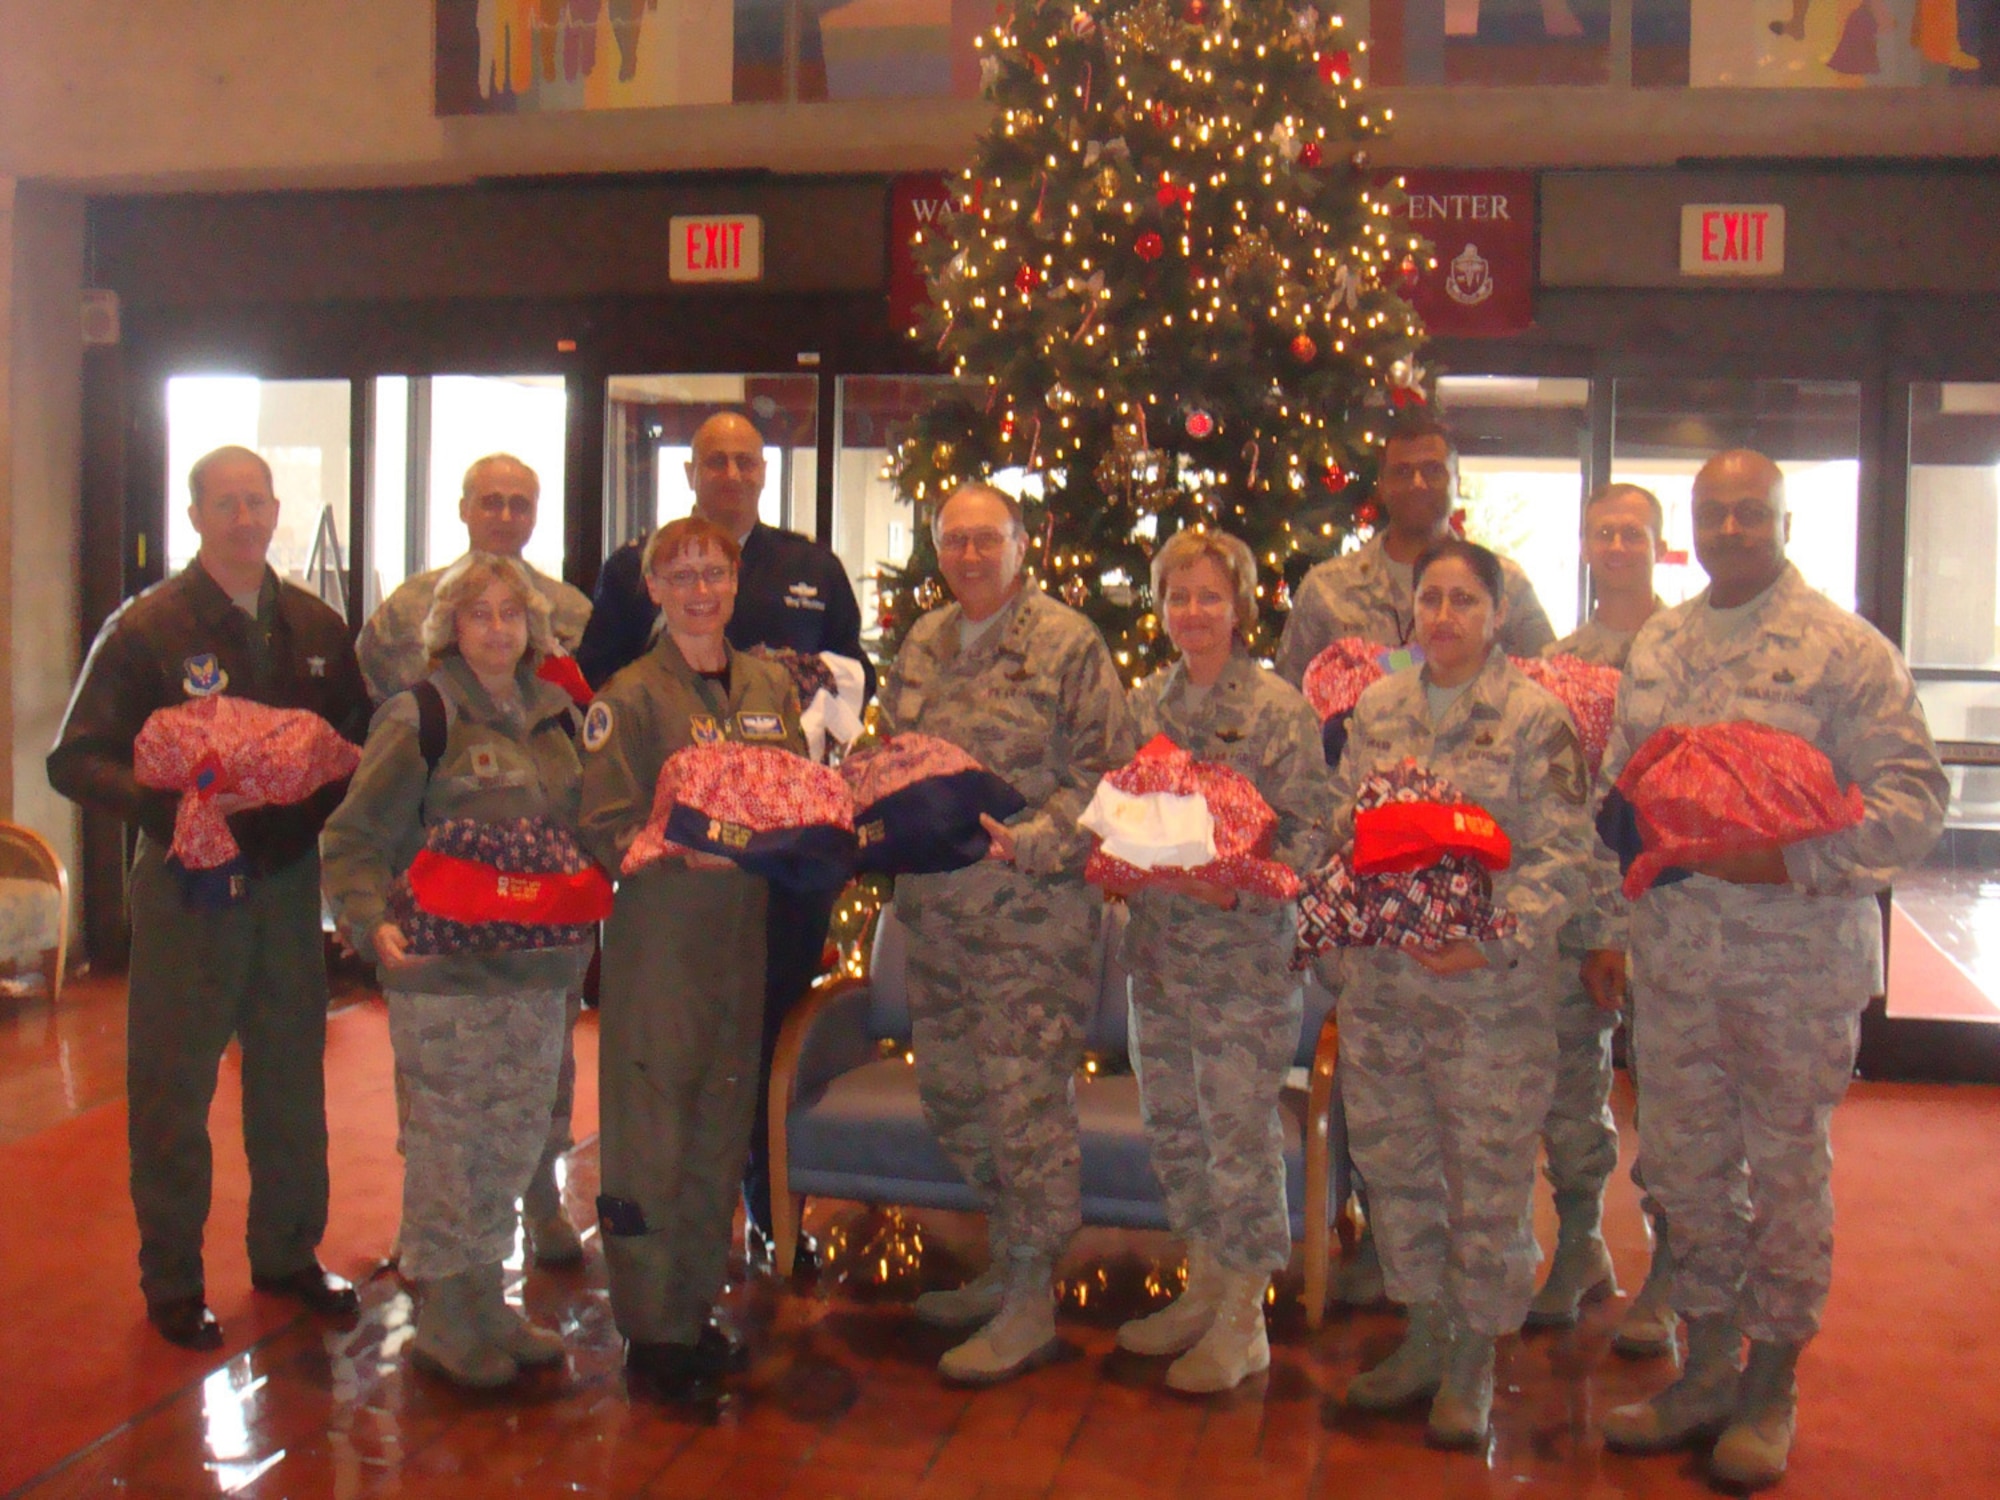 Airmen from the Office of Air Force Reserve form up in the Walter Reed Hospital Reception area to present care packages to Wounded Warriors Dec. 3, 2010. In the front row from left are Maj. Cathy Hight, Medical Directorate; Maj. Dee Ketterer, chief of Reserve Mobility Programming; Lt. Gen. Charles E. Stenner Jr., chief of Air Force Reserve; Brig. Gen. Maryanne Miller, director of Programs and Requirements; Chief Master Sgt. Beatriz Swann, Personnel Directorate; and Senior Master Sgt. Curtis Webber, Programs and Requirements Directorate. In the back row from left are Col. Mark Ross, Policy Integration Directorate; Col. Mike Ricci, Programs and Requirements Directorate; Brig. Gen.  Richard Haddad, special assistant to the chief of Air Force Reserve; Maj. Gary Byrd, Programs and Requirements Directorate; and Col. Hugh Hegtvedt, executive officer to the chief of Air Force Reserve. (U.S. Air Force photo/Col. Bob Thompson)                             